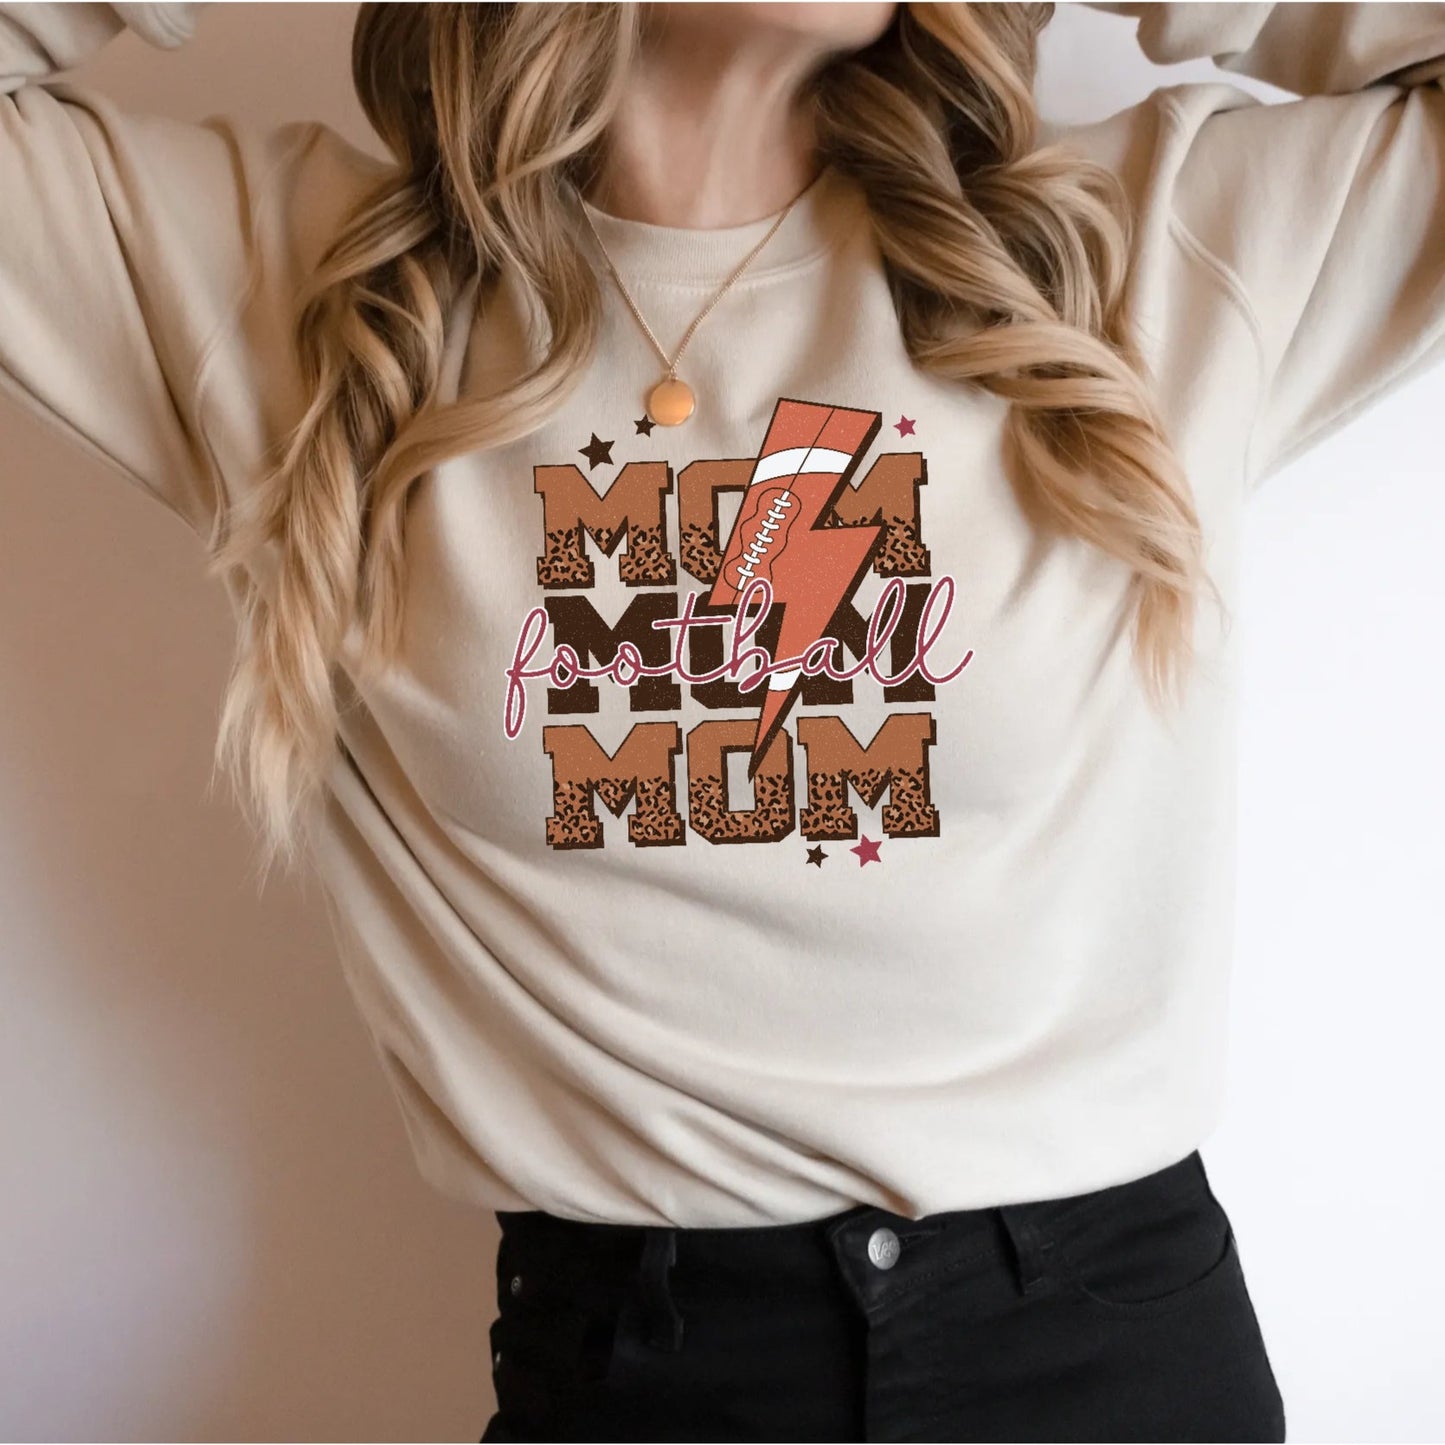 Retro Football Mom Crewneck Sweatshirt with lightening bolt and leopard print detail in sand color